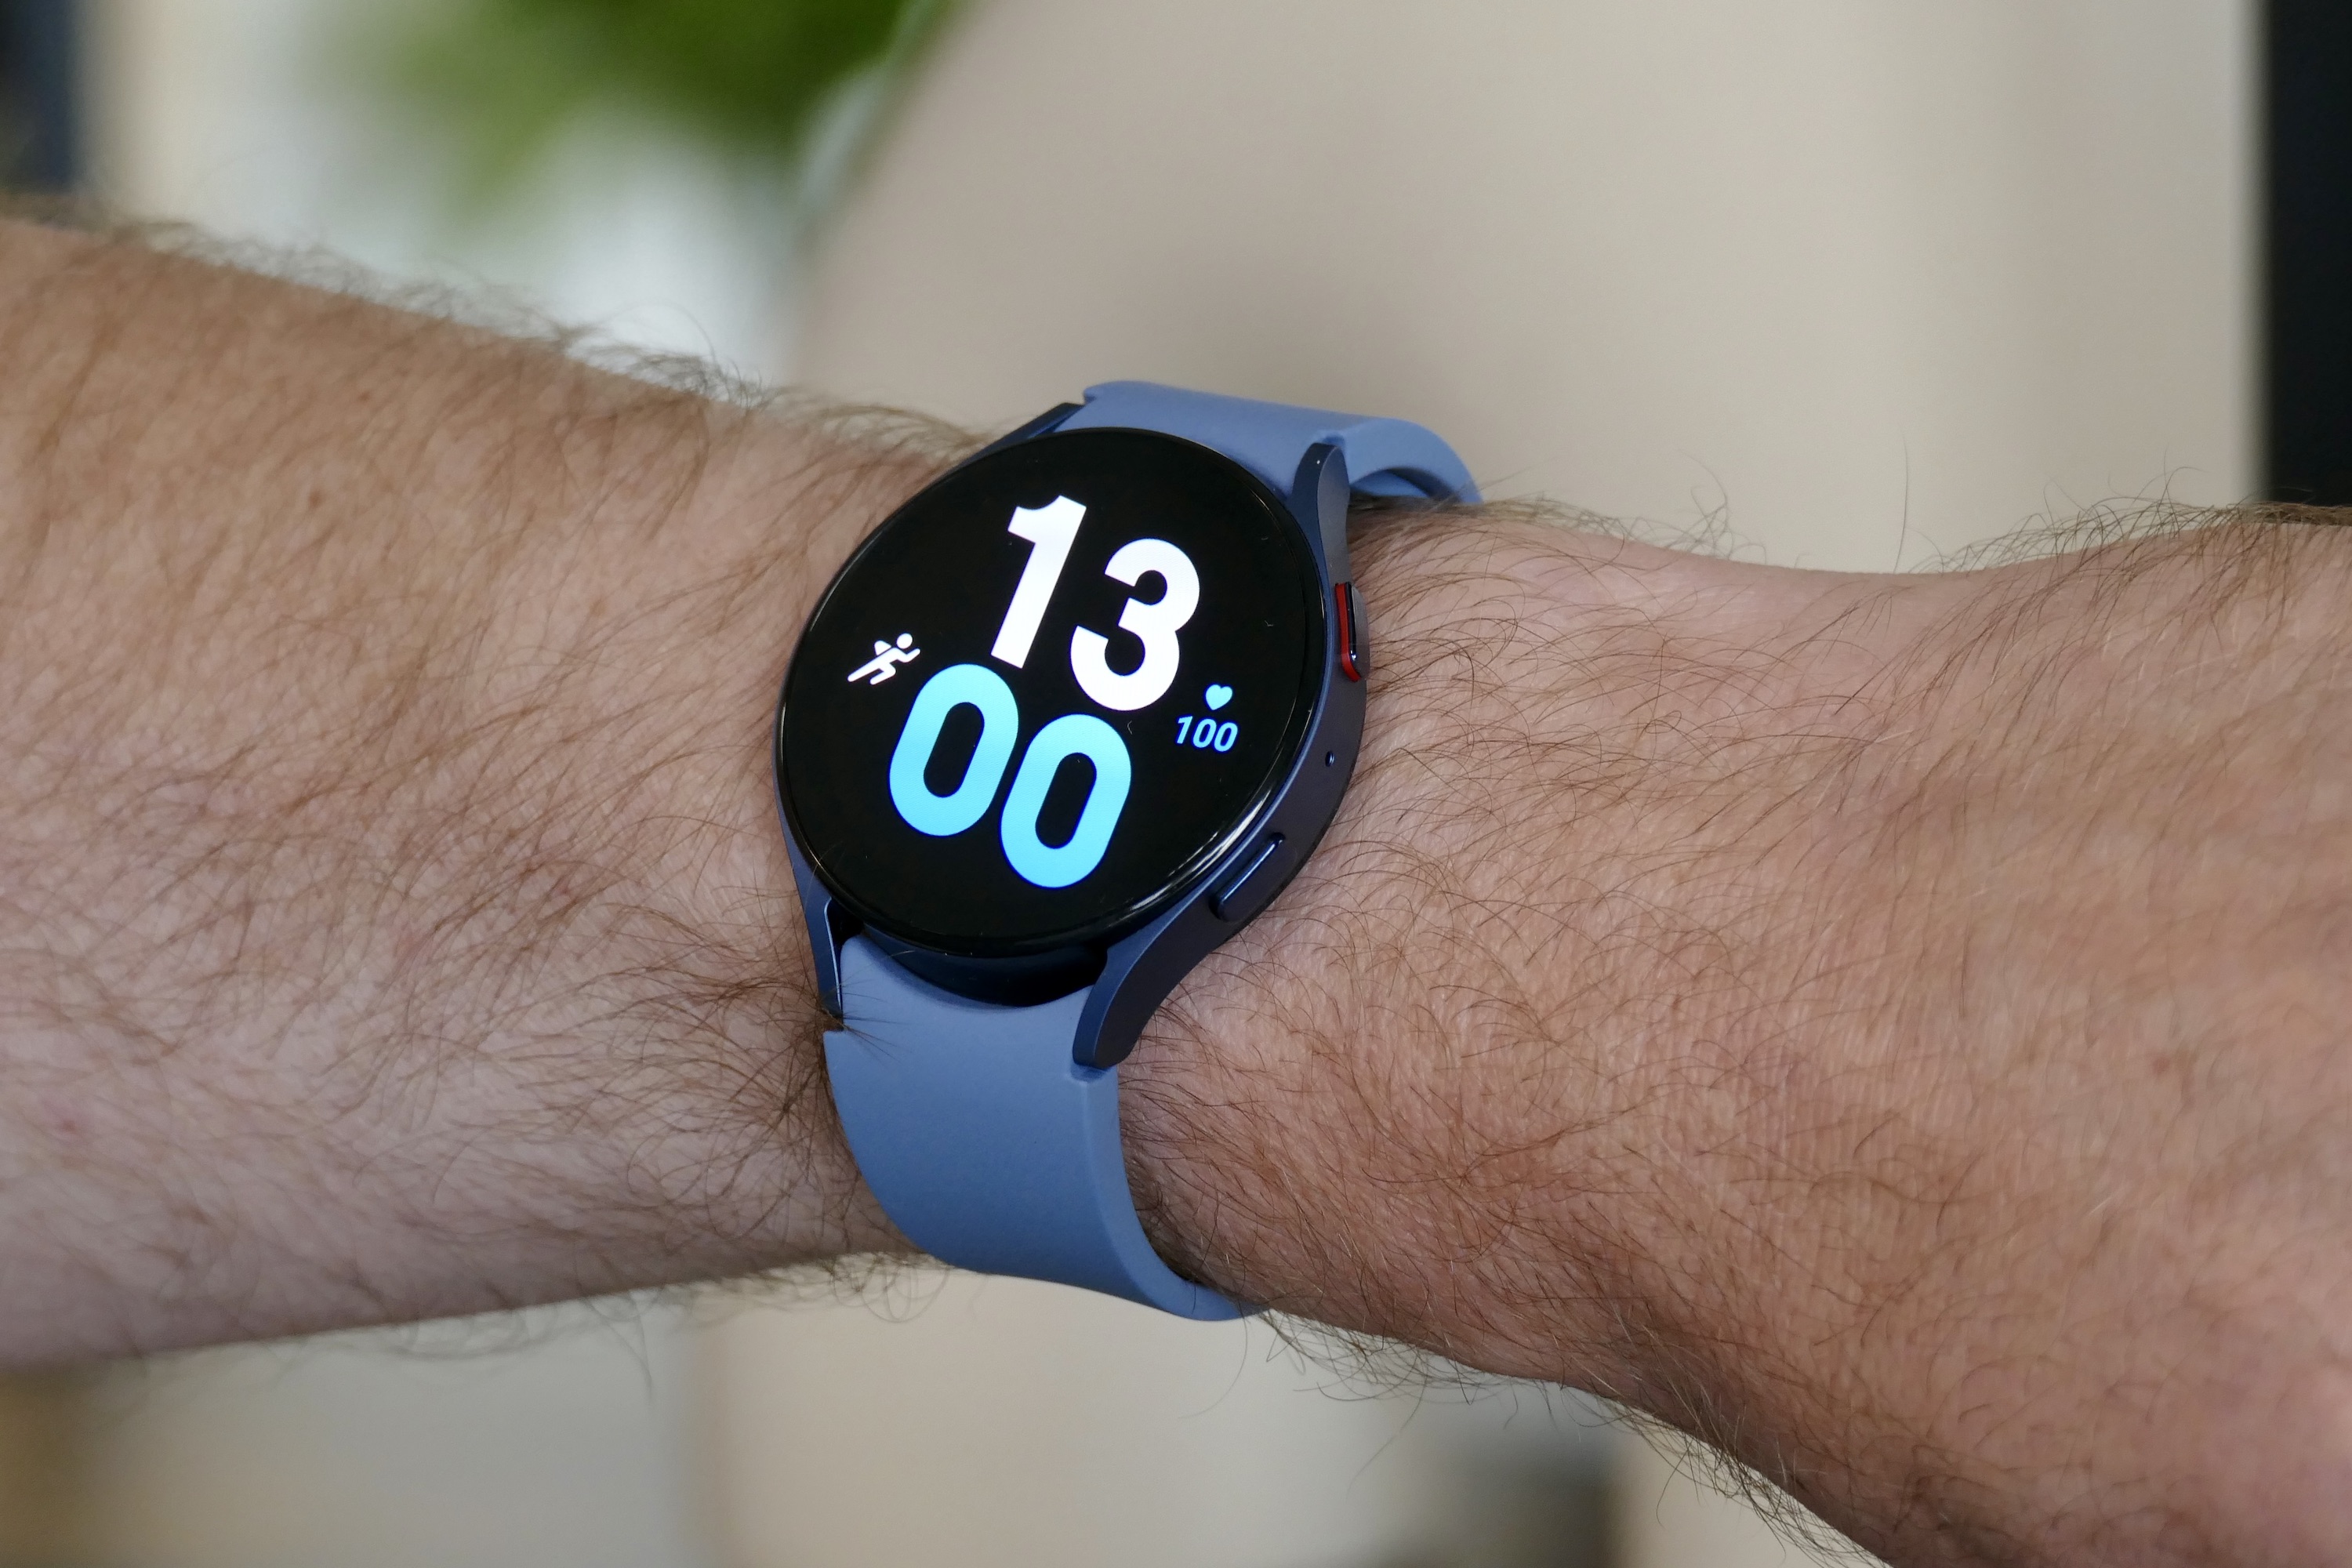 How's it like to upgrade from the Galaxy Watch Active to the Galaxy Watch4?